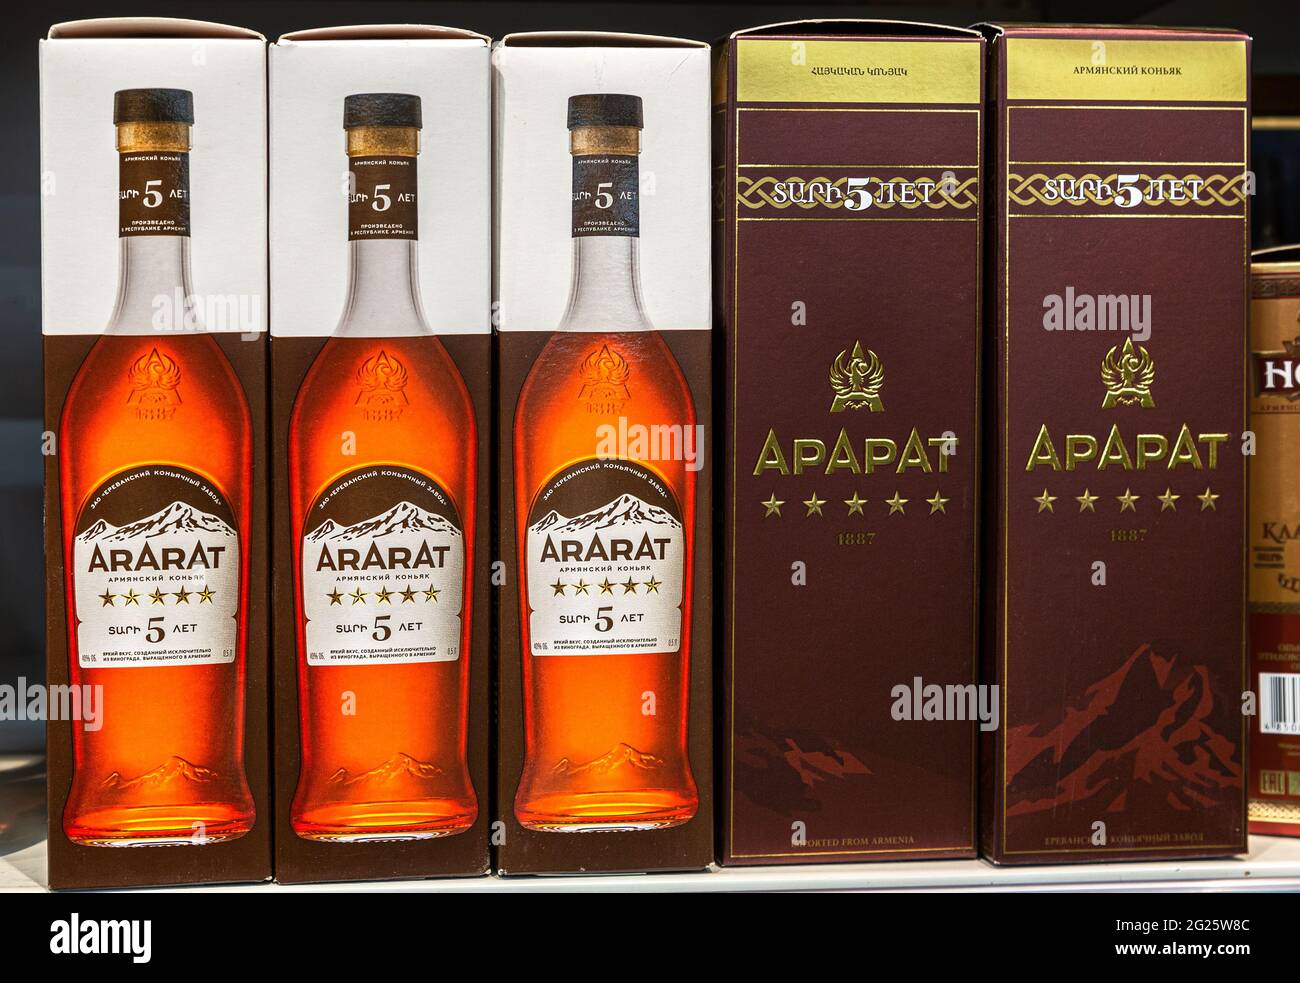 Samara, Russia - June 6, 2021: Ararat armenian cognac on the shelf at the superstore. Bottled alcoholic drinks and spirits. Strong alcoholic beverages Stock Photo